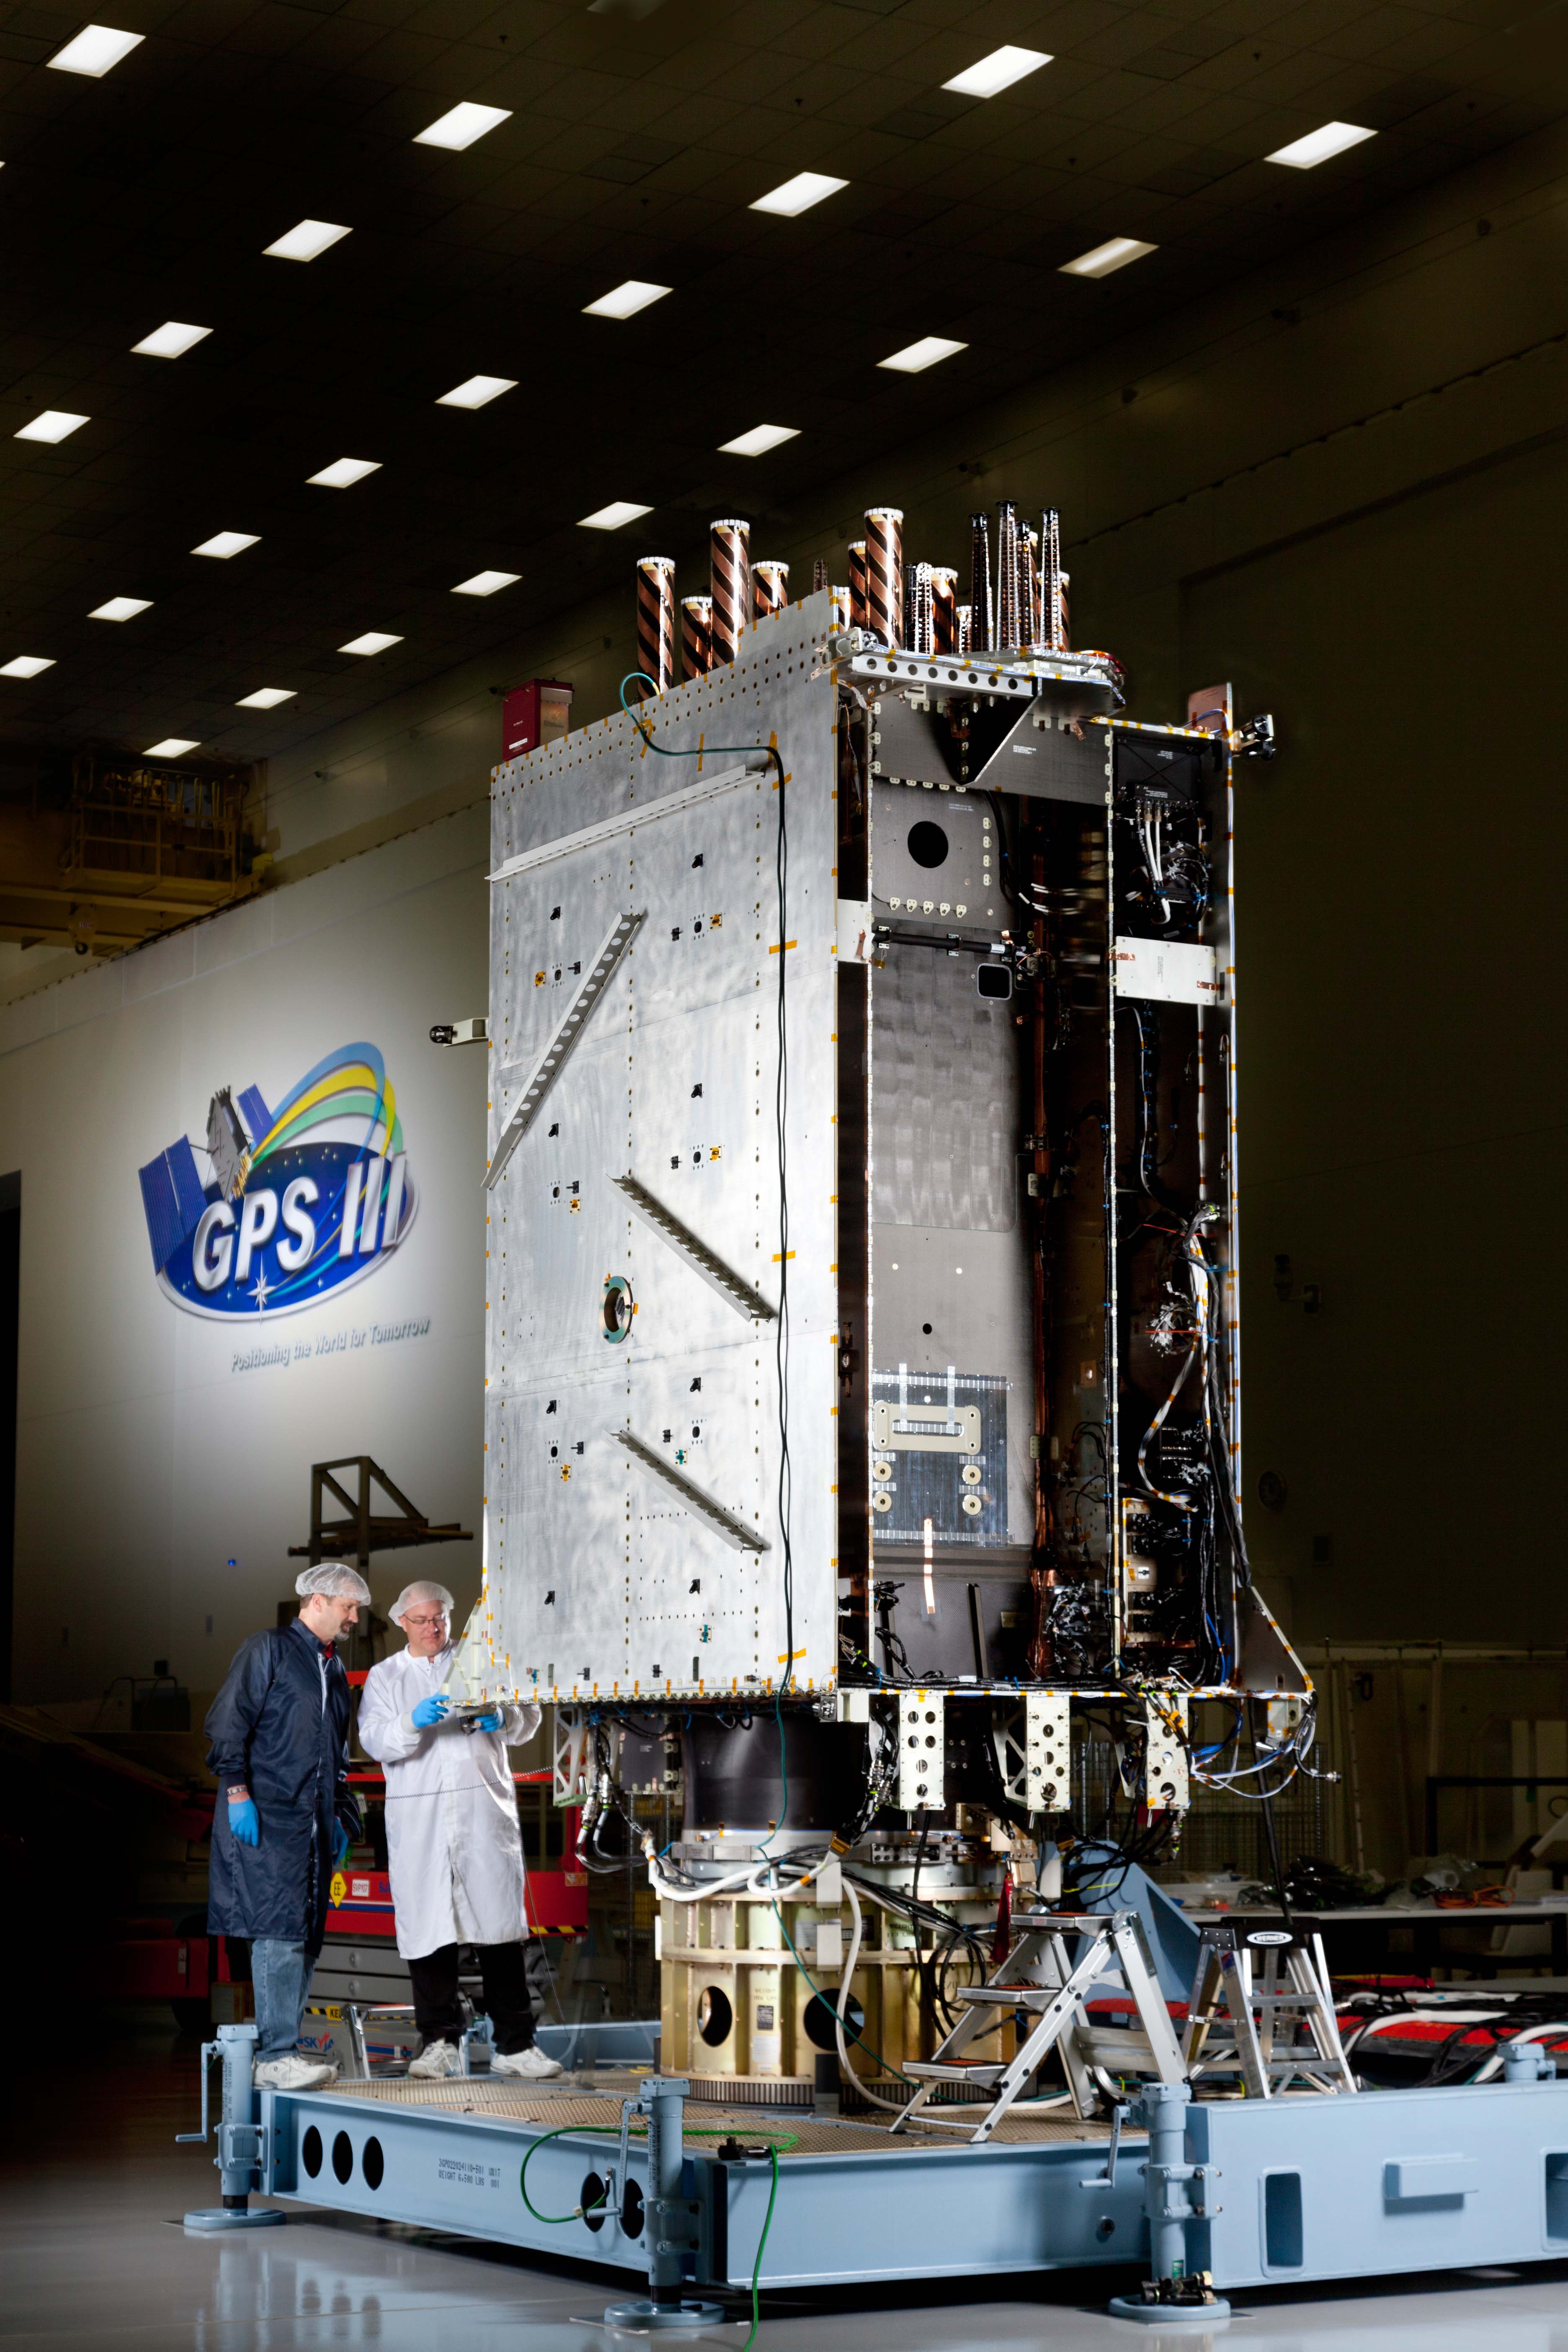 opnåelige Folde Spanien US Airforce declares that the first GPS III is "available for launch" -  Geospatial World